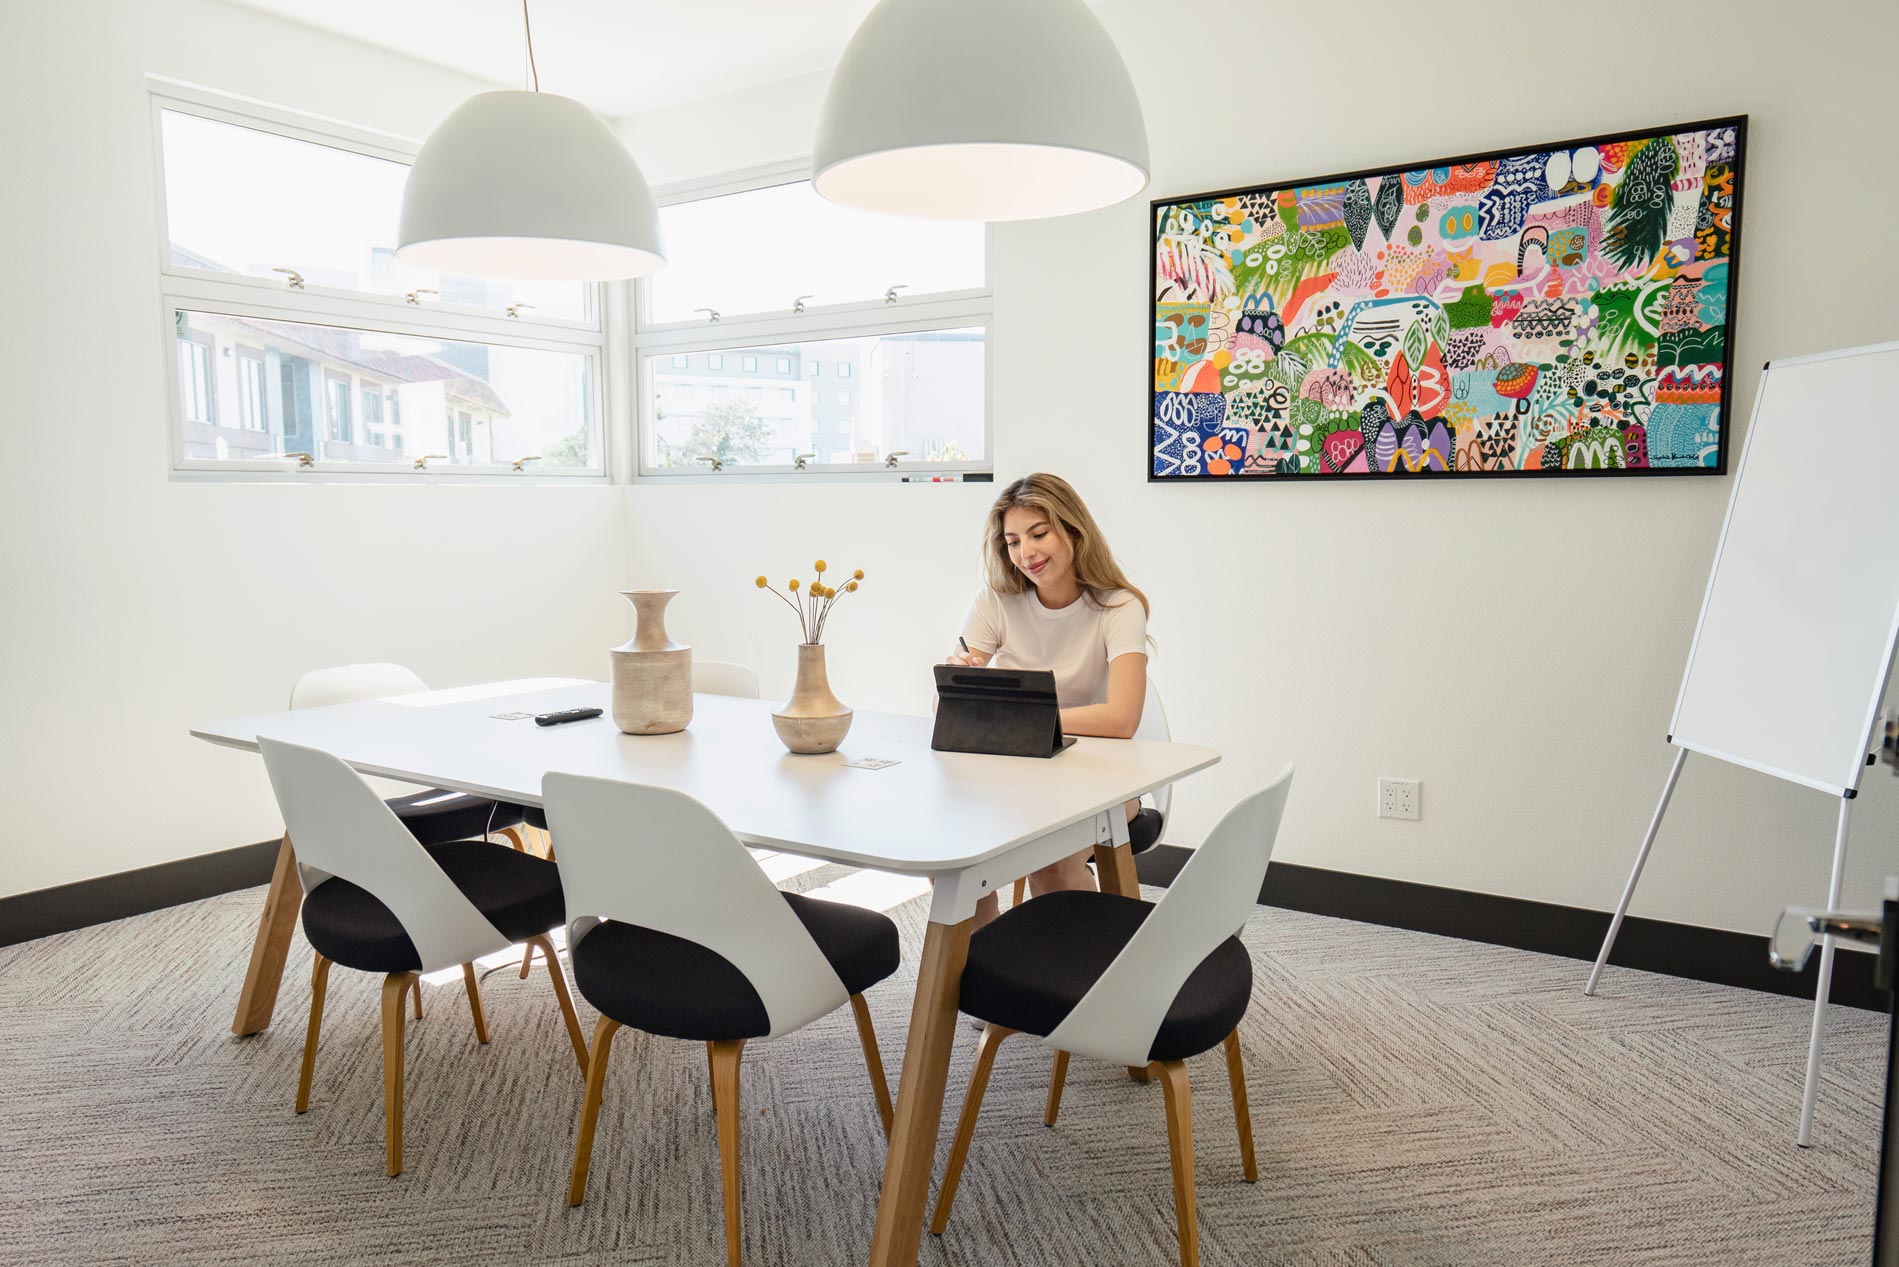 CitySouth woman works in conference room